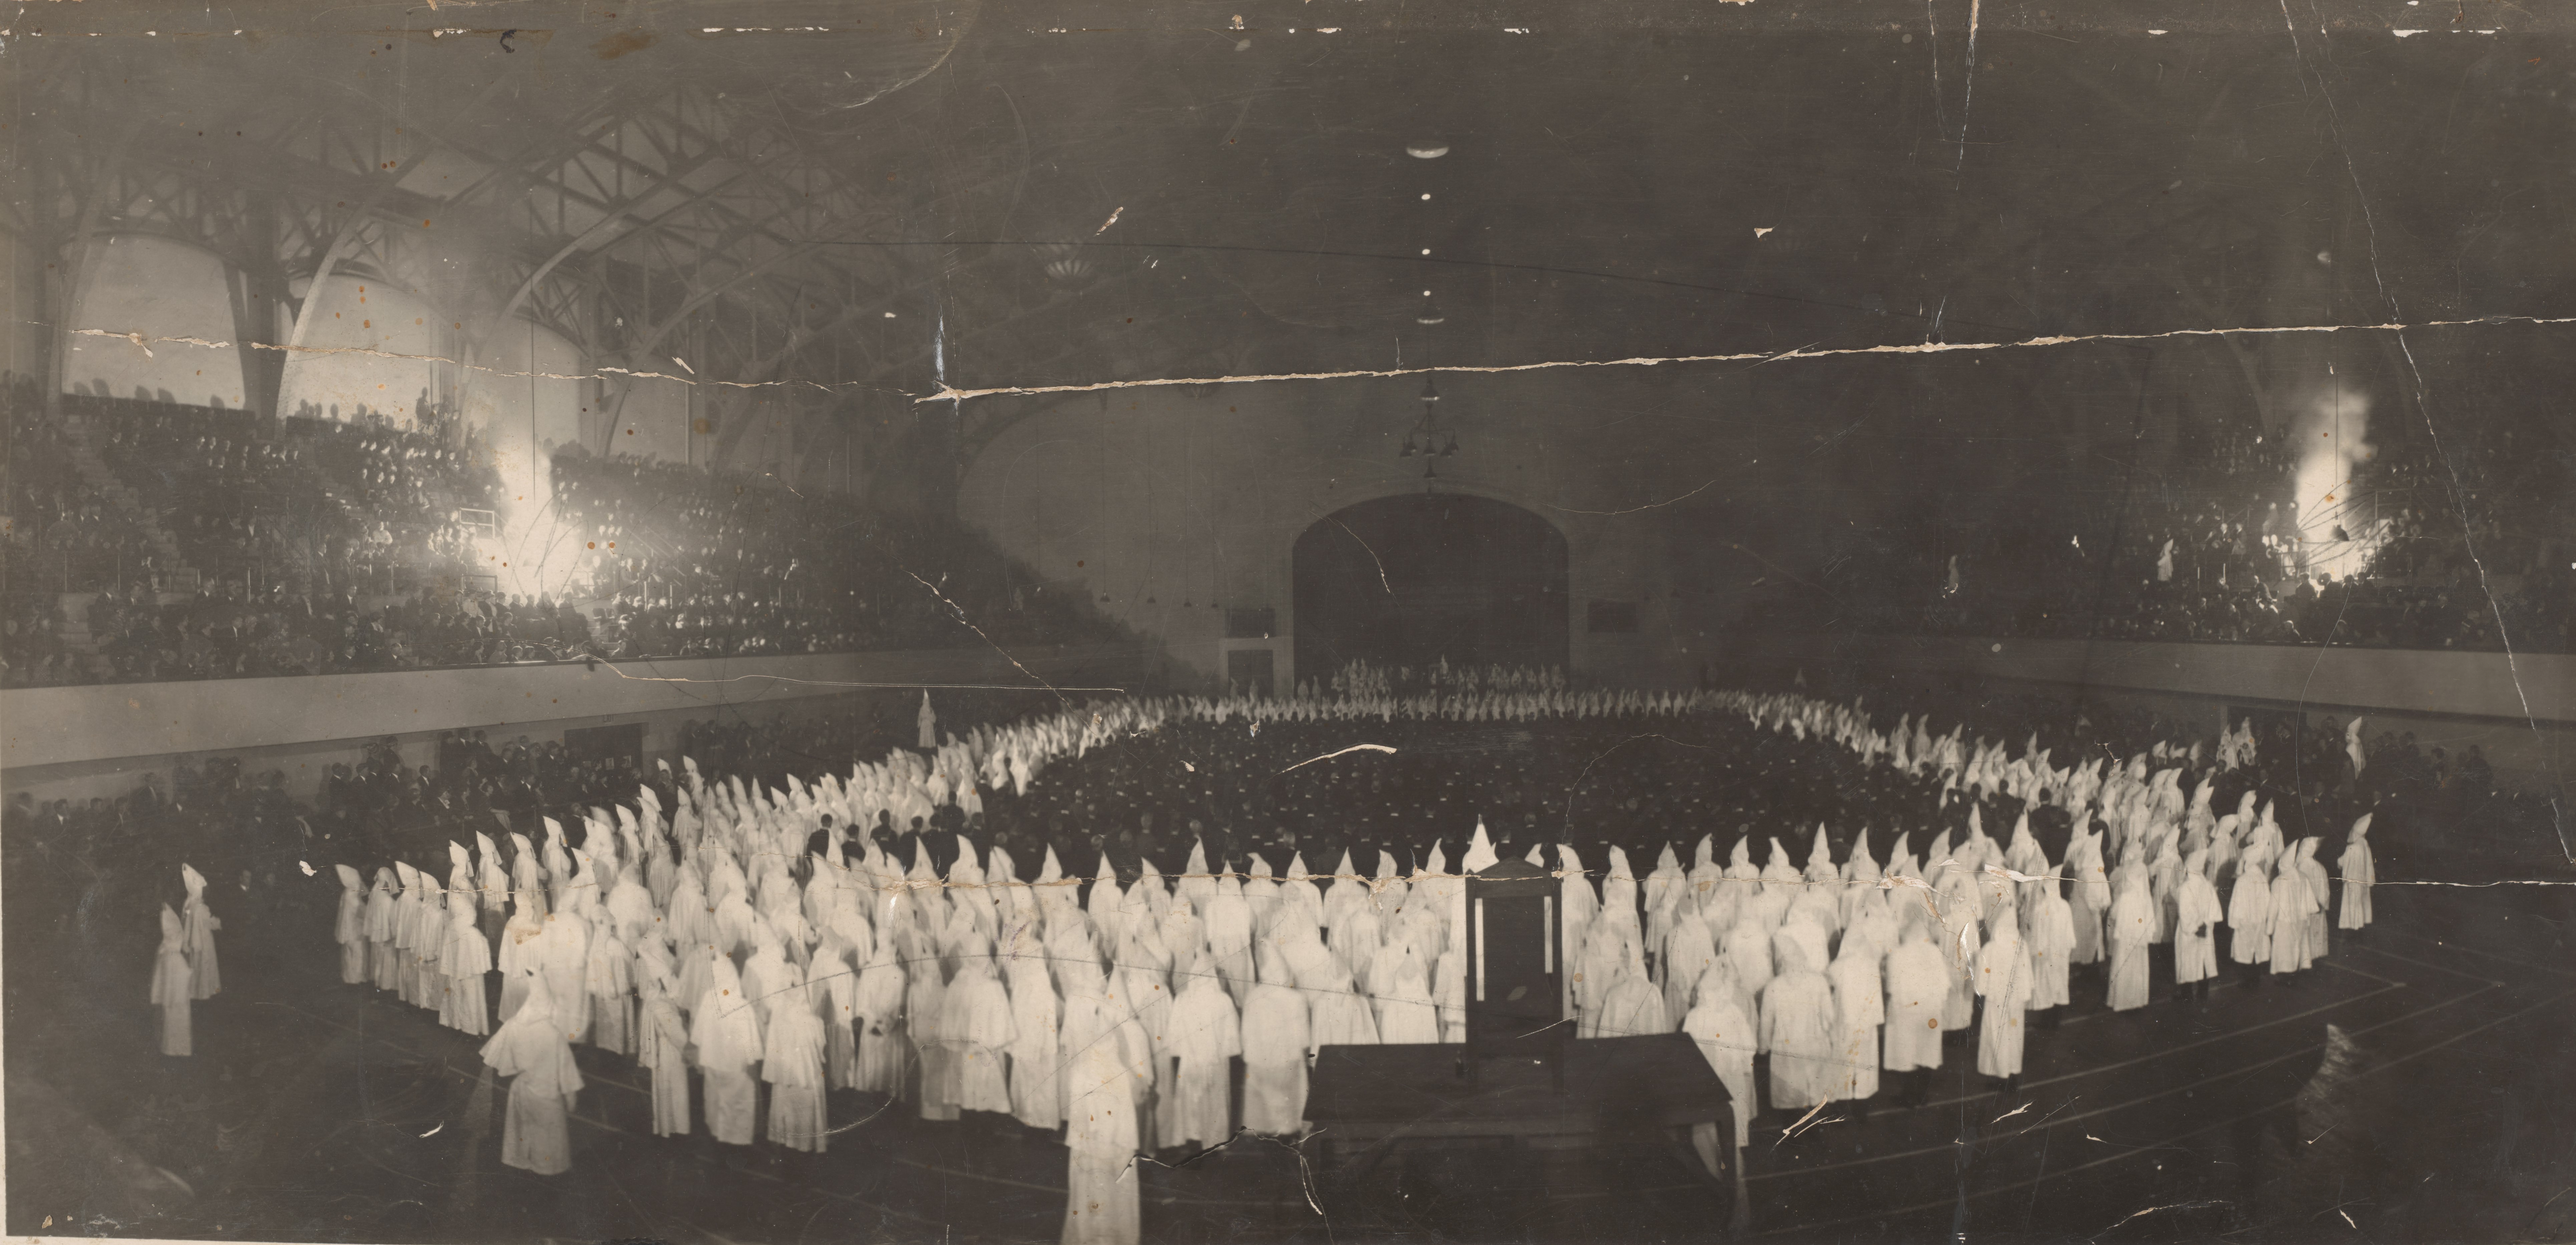 photo: In the 1920s, the Oakland Klan chapter had thousands of followers, and in 1925, 8,500 people participated in a Ku Klux Klan cross-burning ceremony inside the Oakland Auditorium (now known as the Kaiser Convention Center). Courtesy of the Bancroft Library, University of California, Berkeley